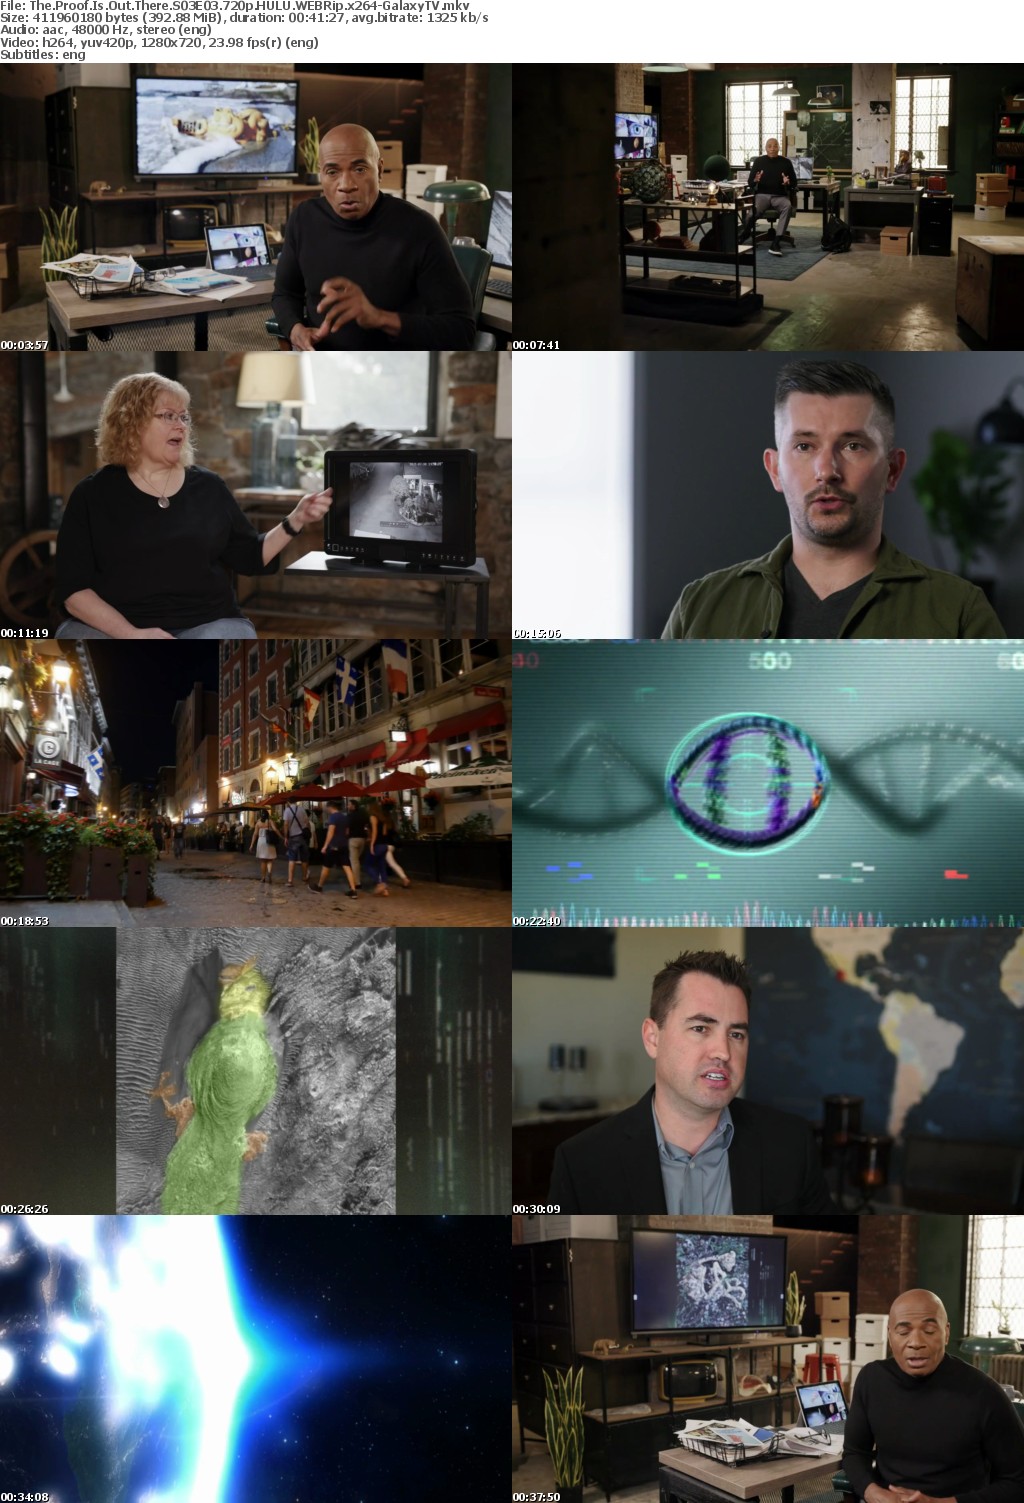 The Proof Is Out There S03 COMPLETE 720p HULU WEBRip x264-GalaxyTV